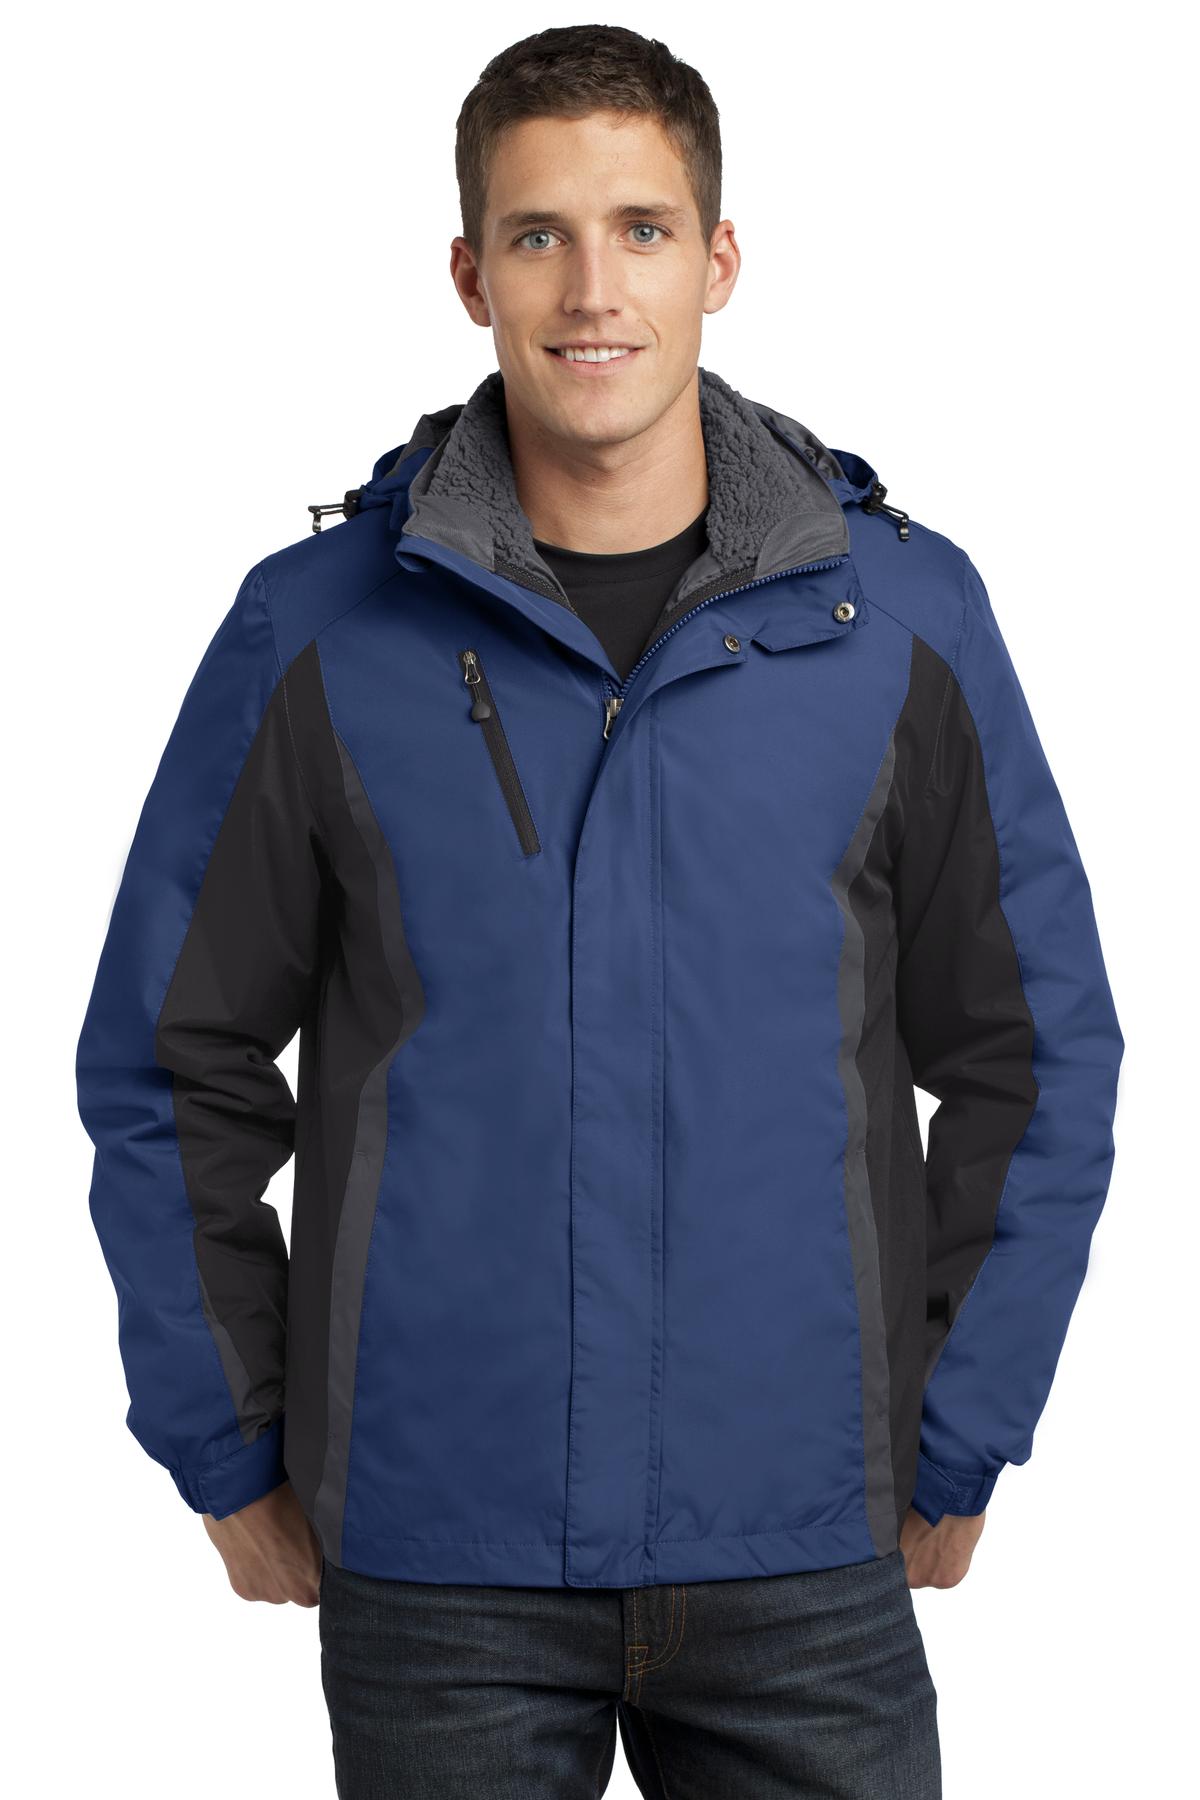 Outerwear Admiral Blue/ Black/ Magnet Port Authority